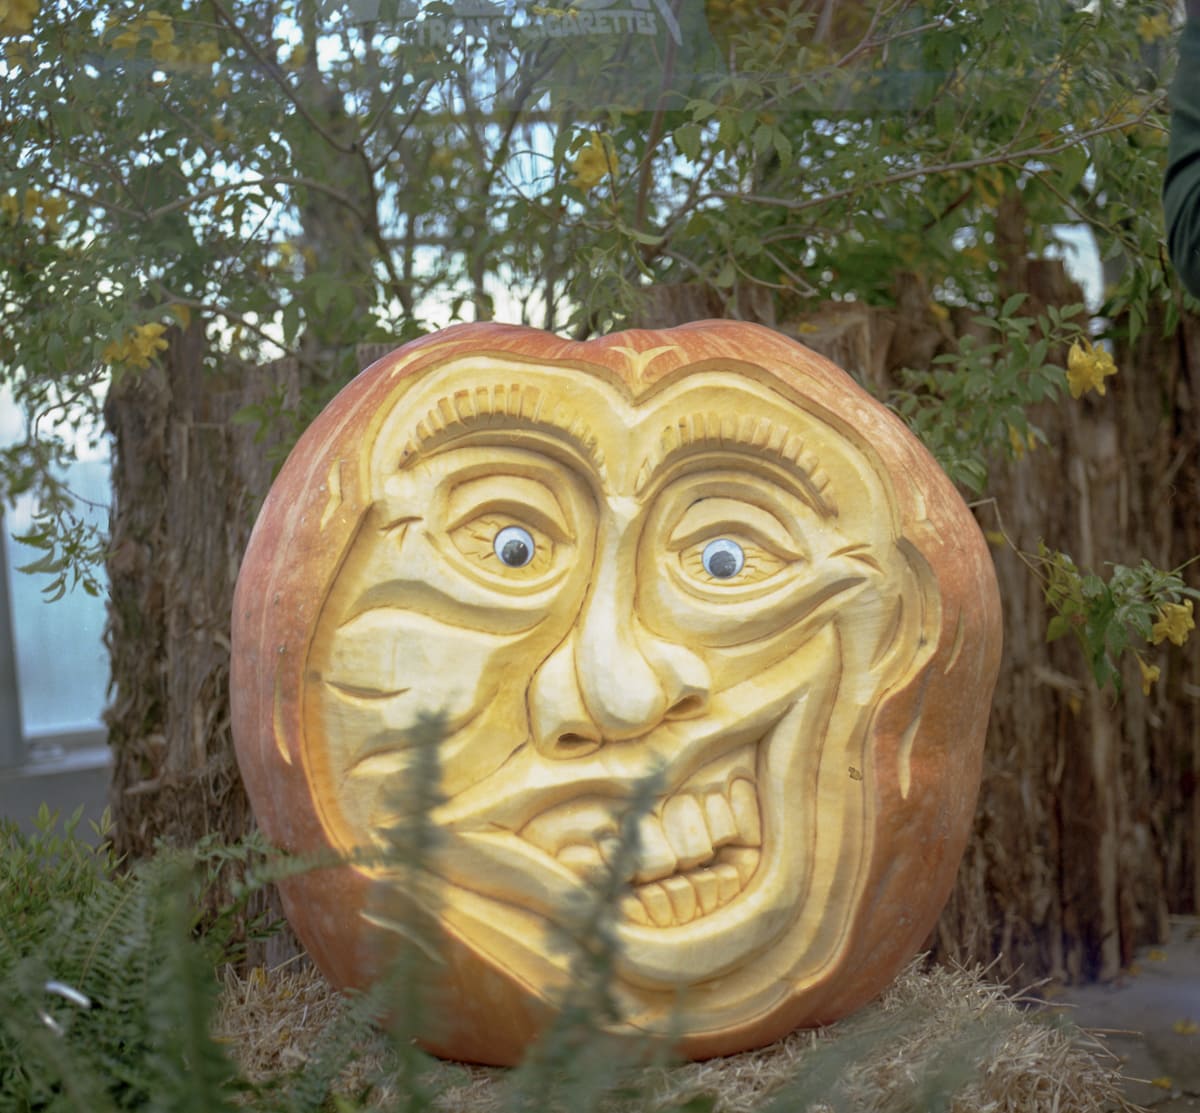 A carved pumpkin at the State Fair of Texas